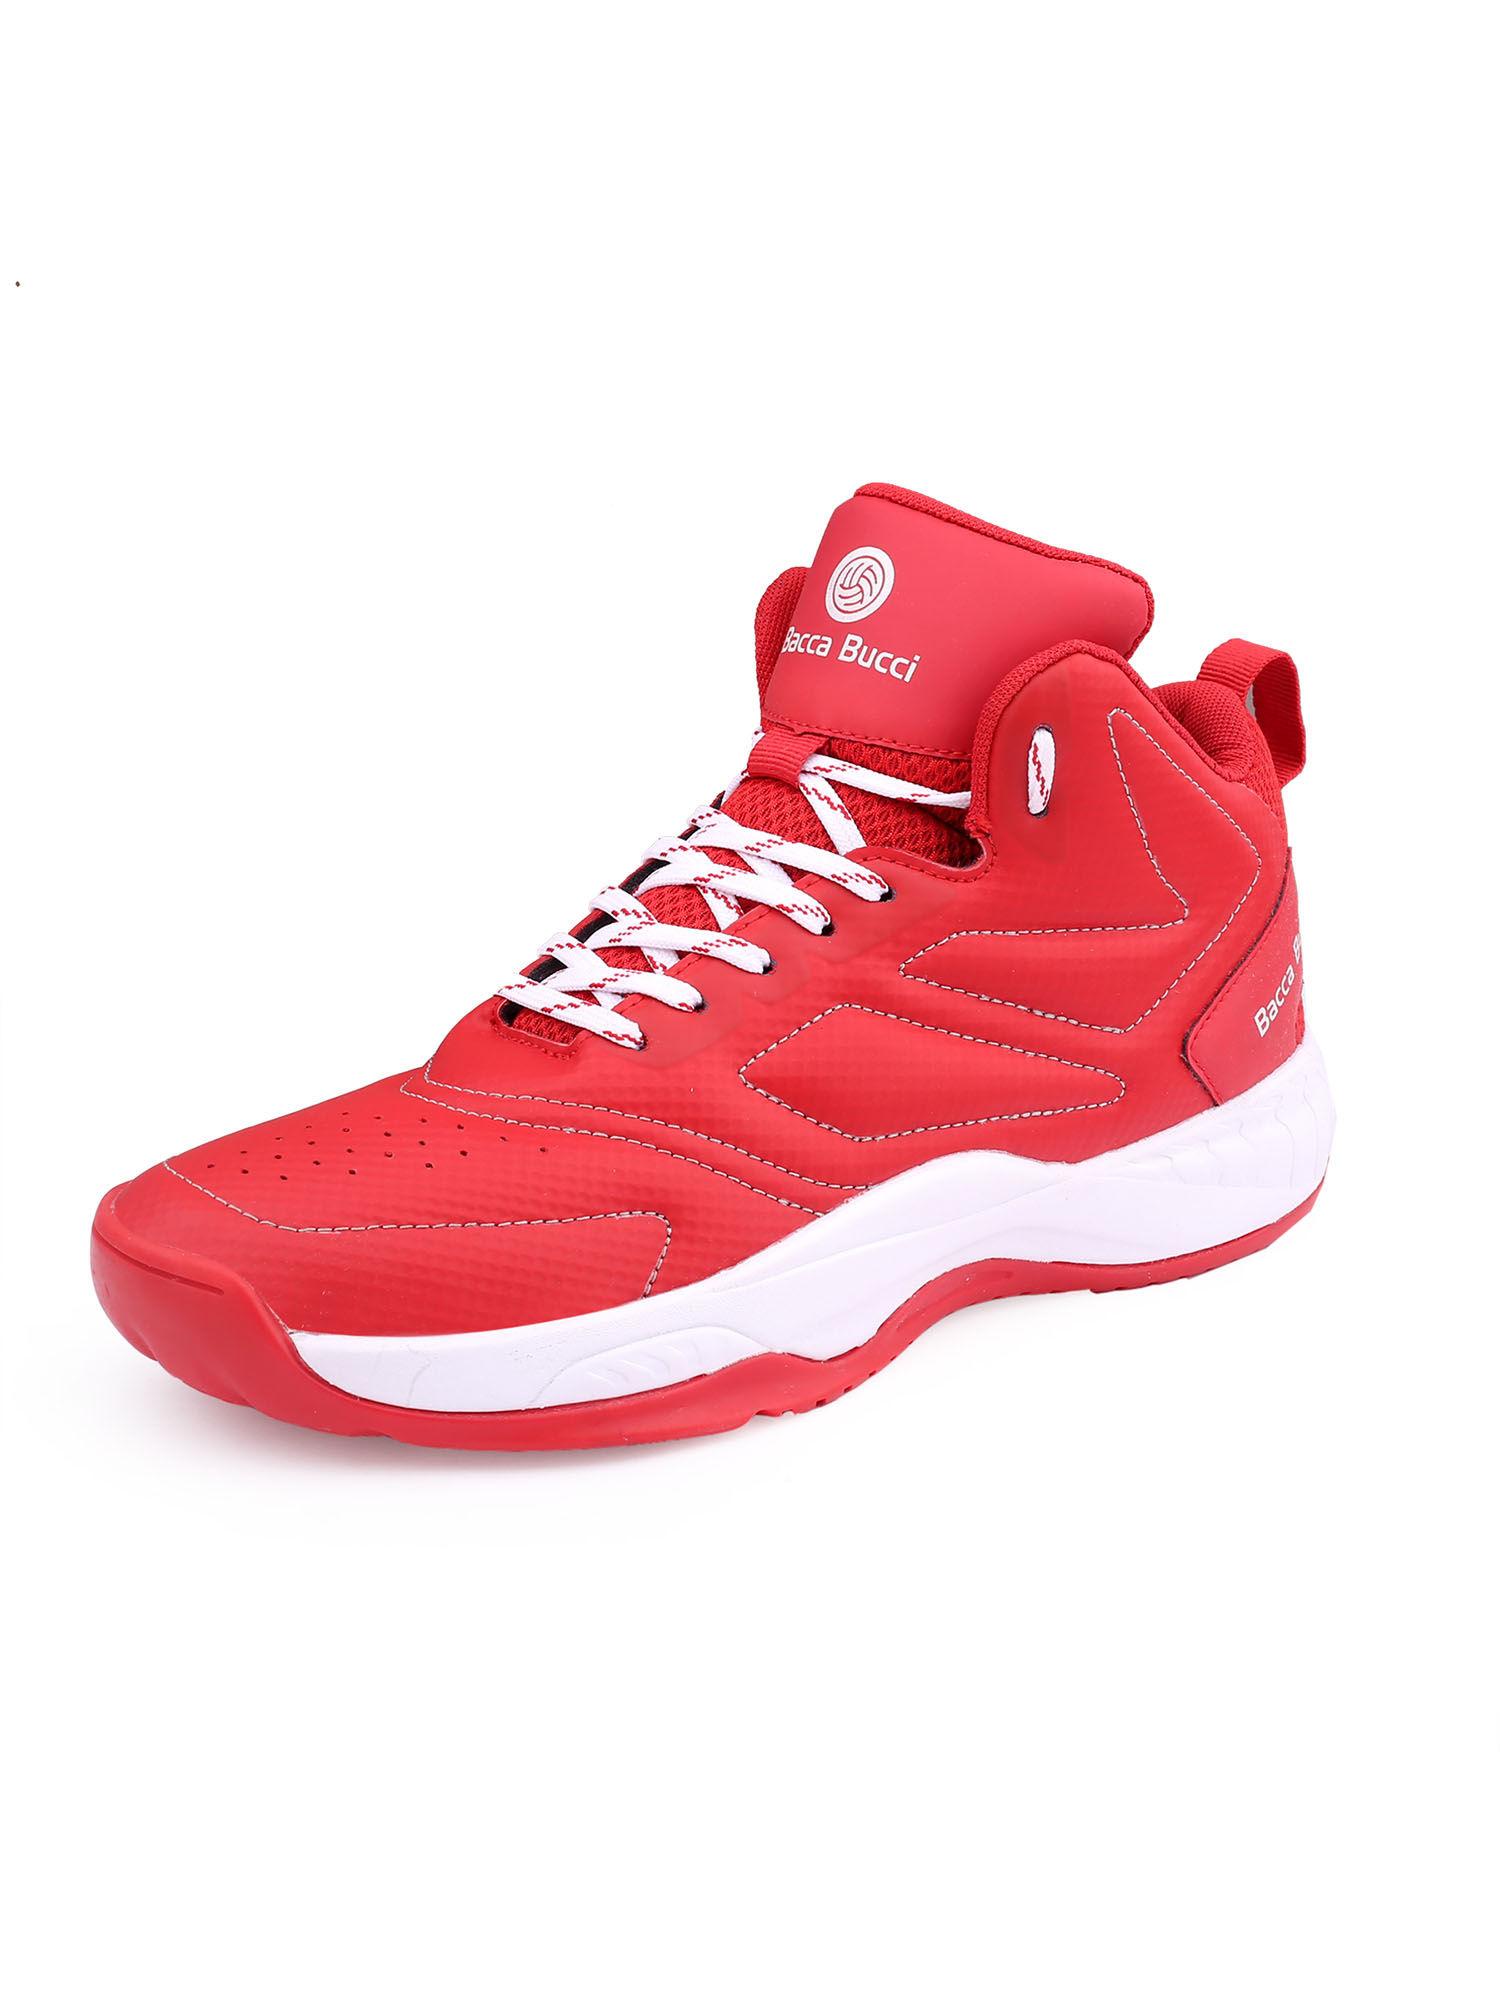 courtflex-all-court-high-top-basketball-shoes